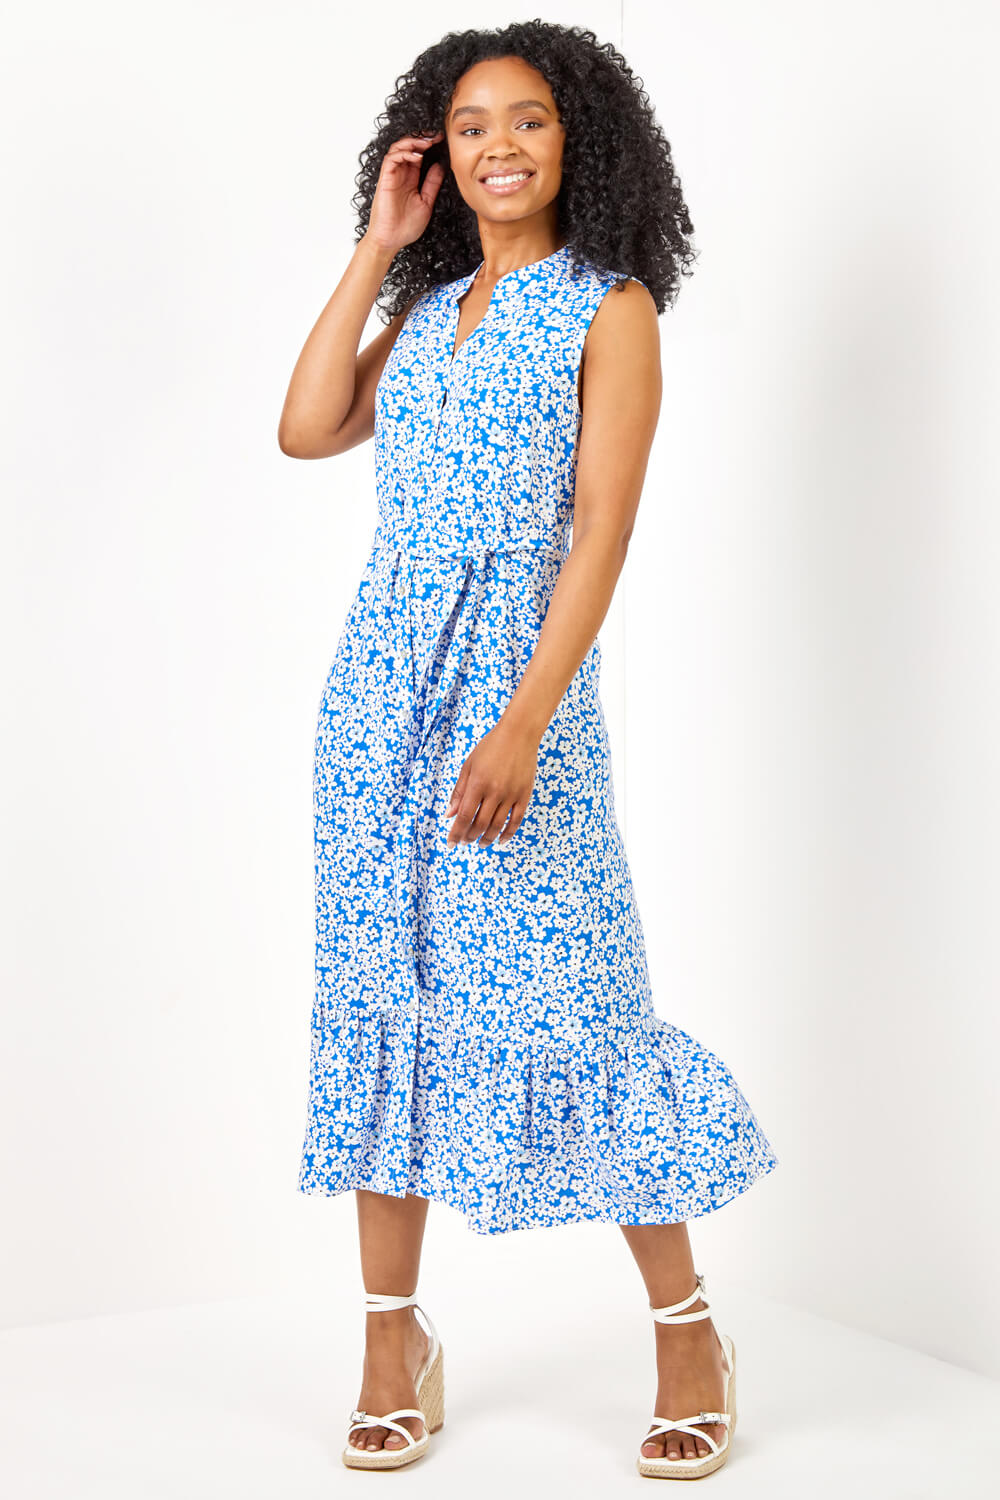 Blue Petite Ditsy Floral Print Frill Tiered Dress, Image 2 of 5